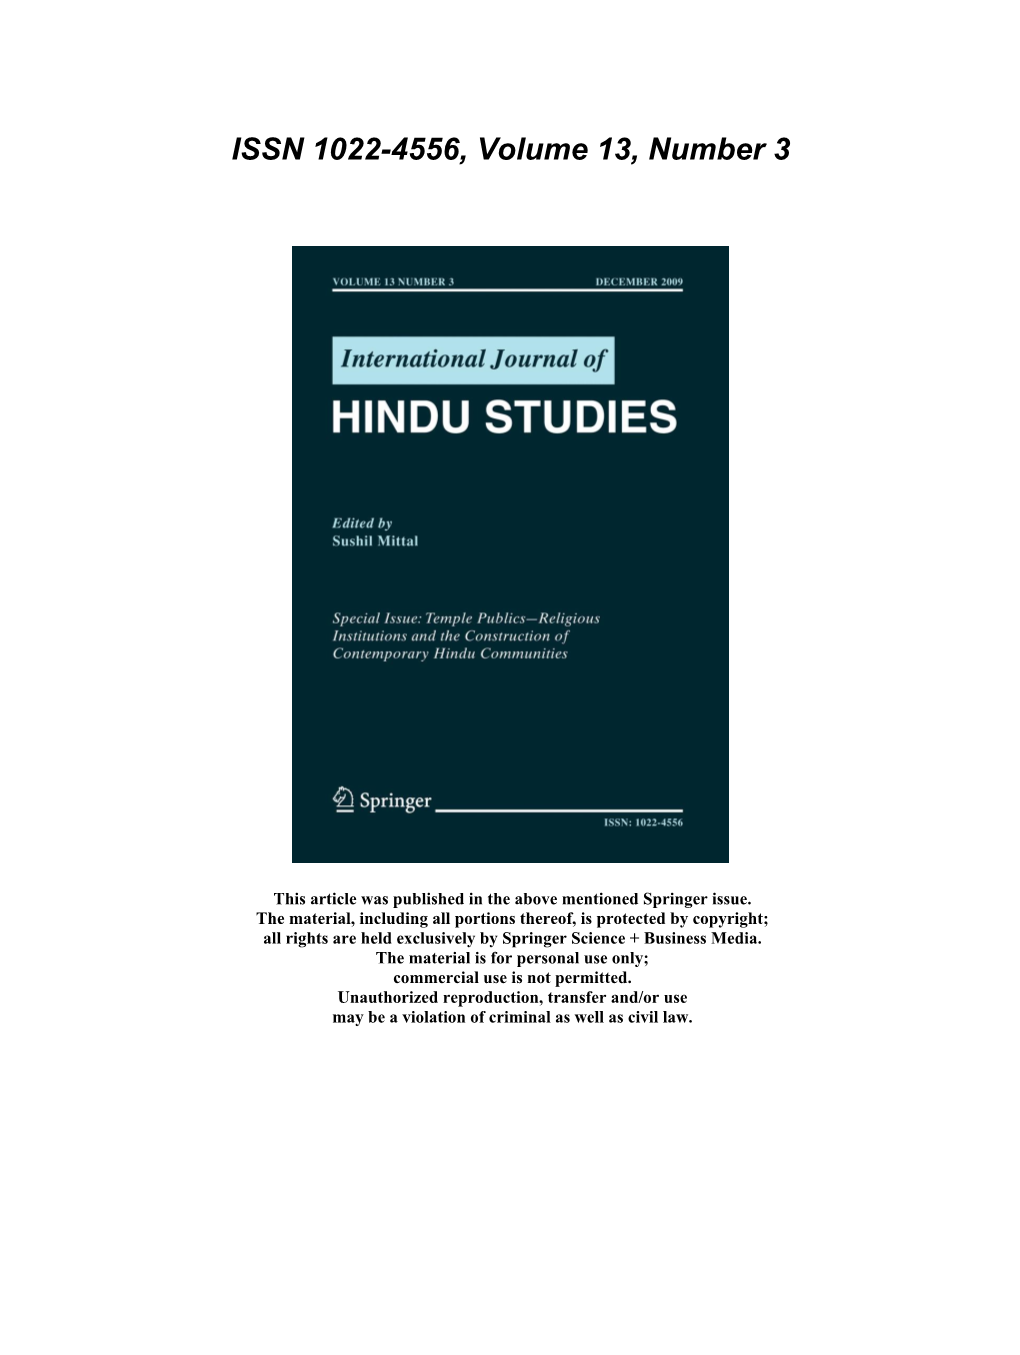 Temple Publics: Religious Institutions and the Construction of Contemporary Hindu Communities